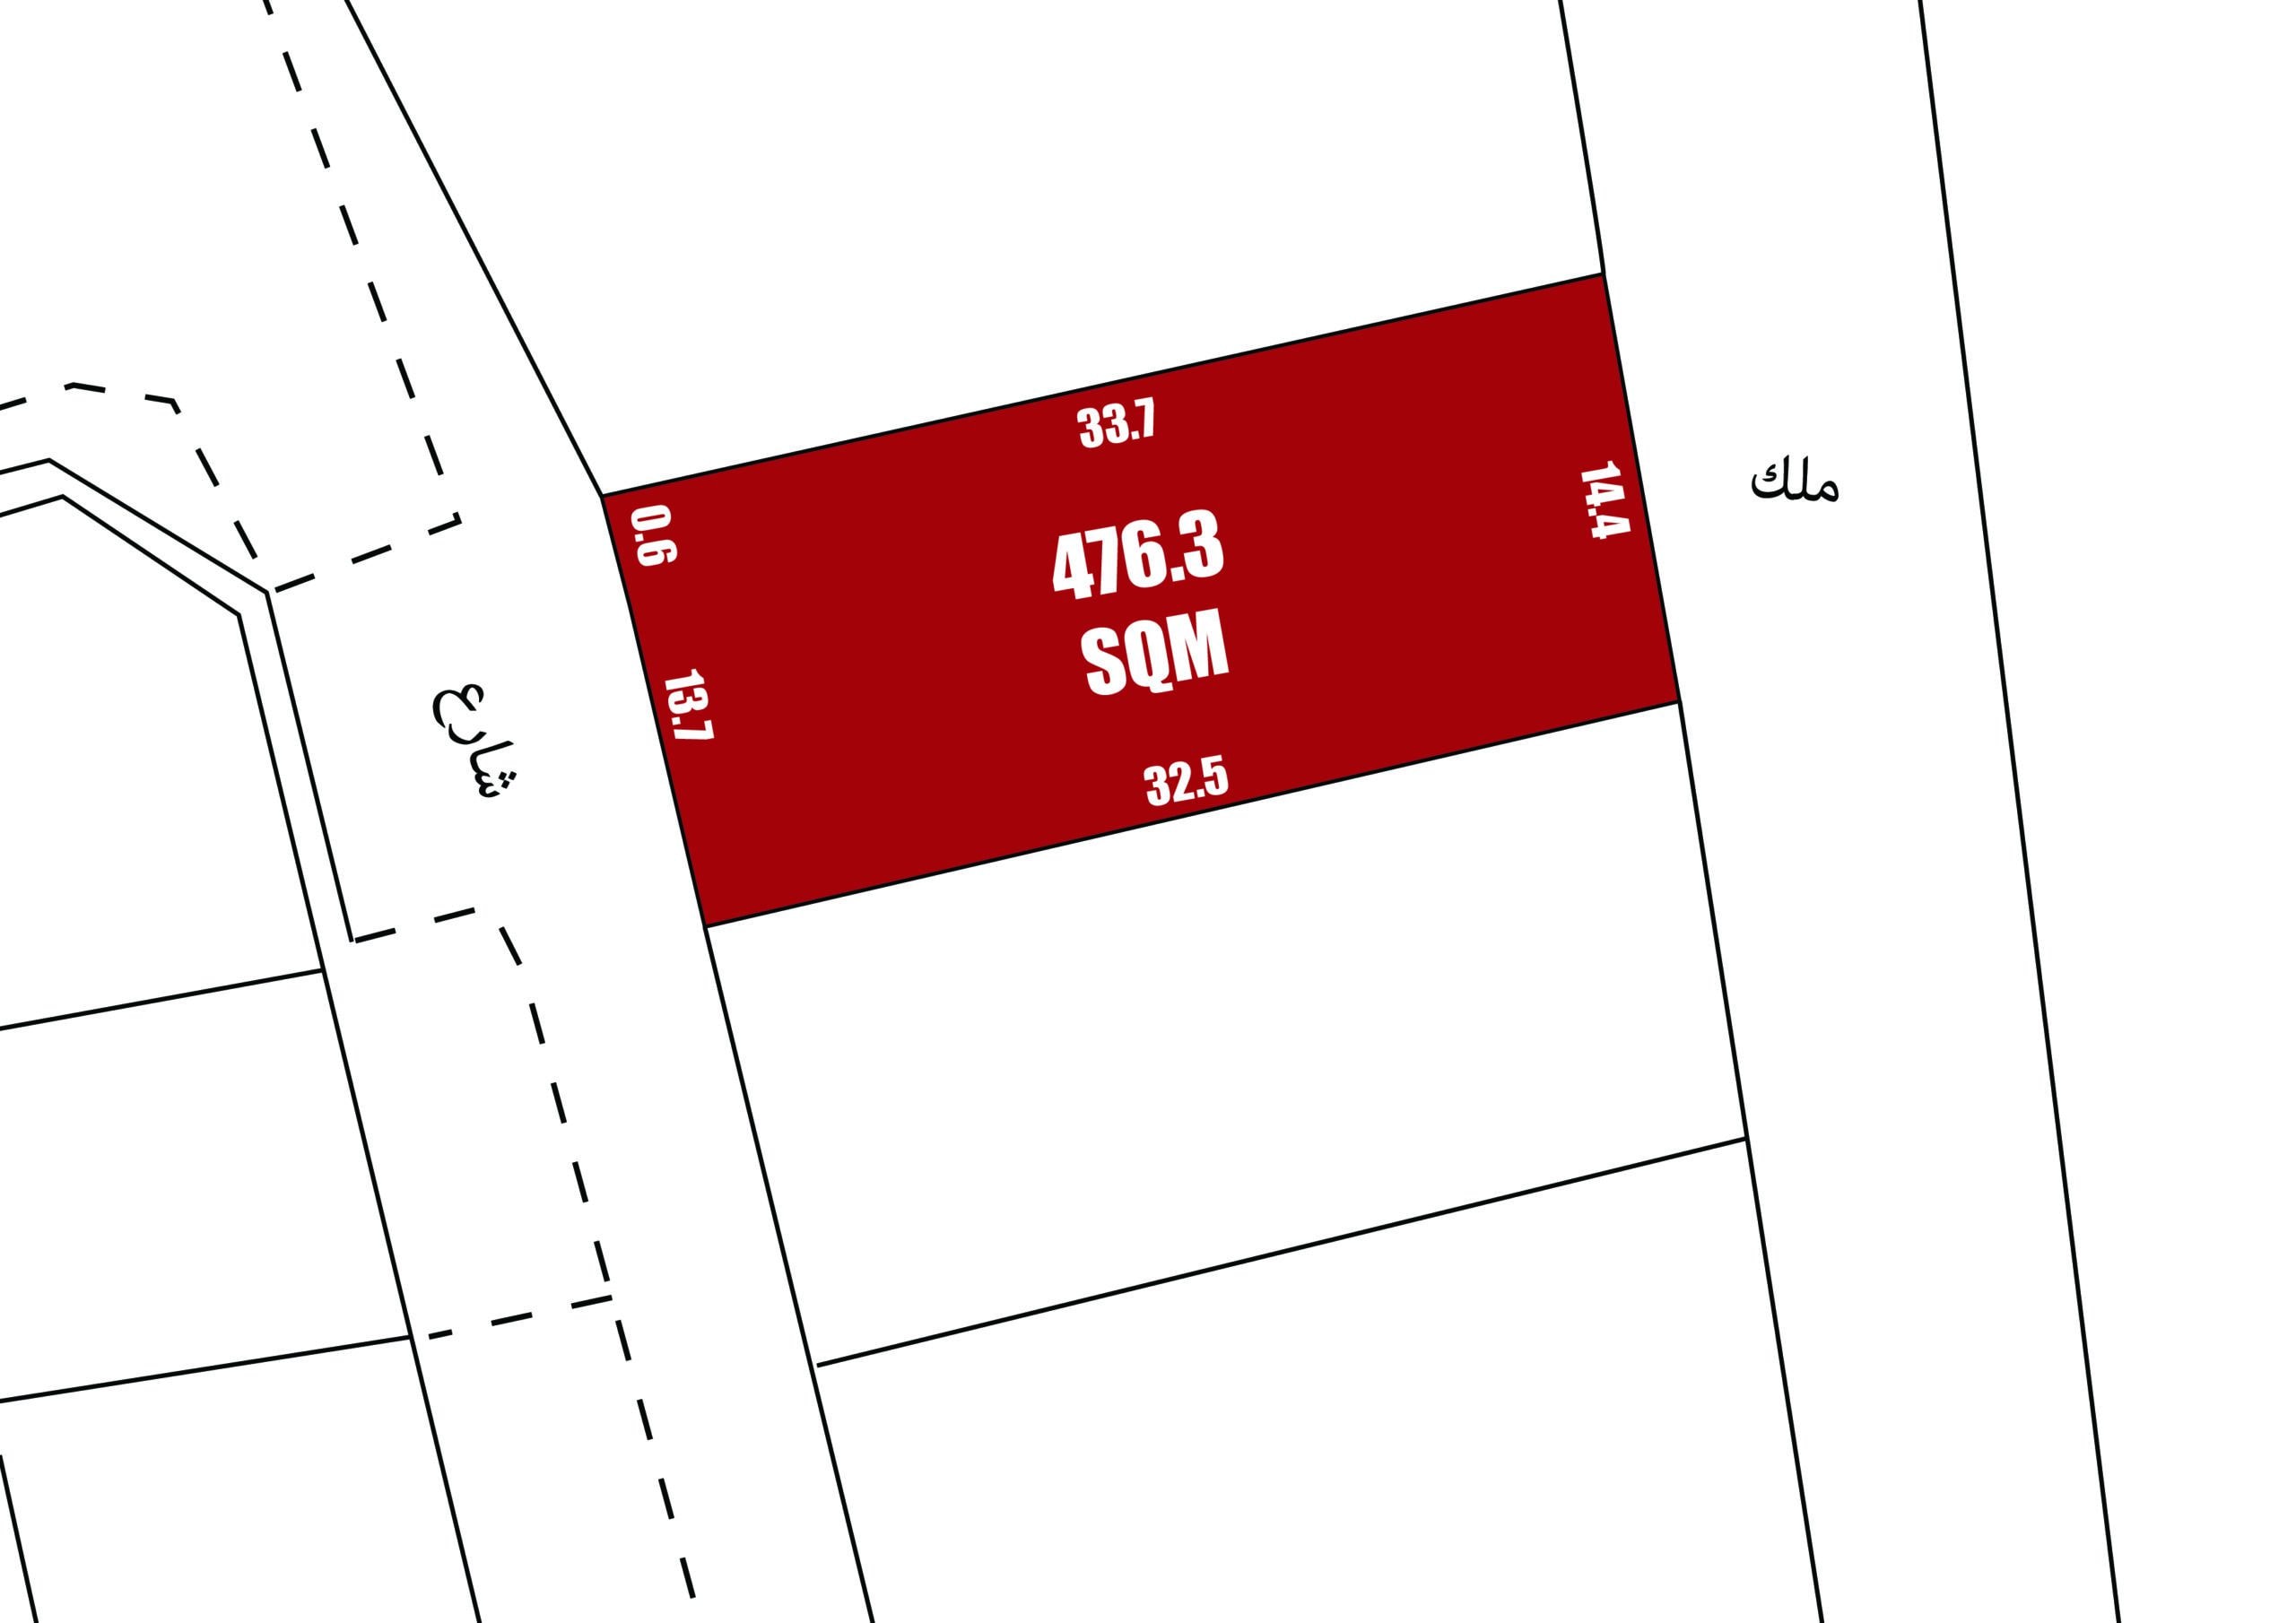 Technical Auto Draft showing a highlighted red area on a map with specific dimensions and markings, such as 